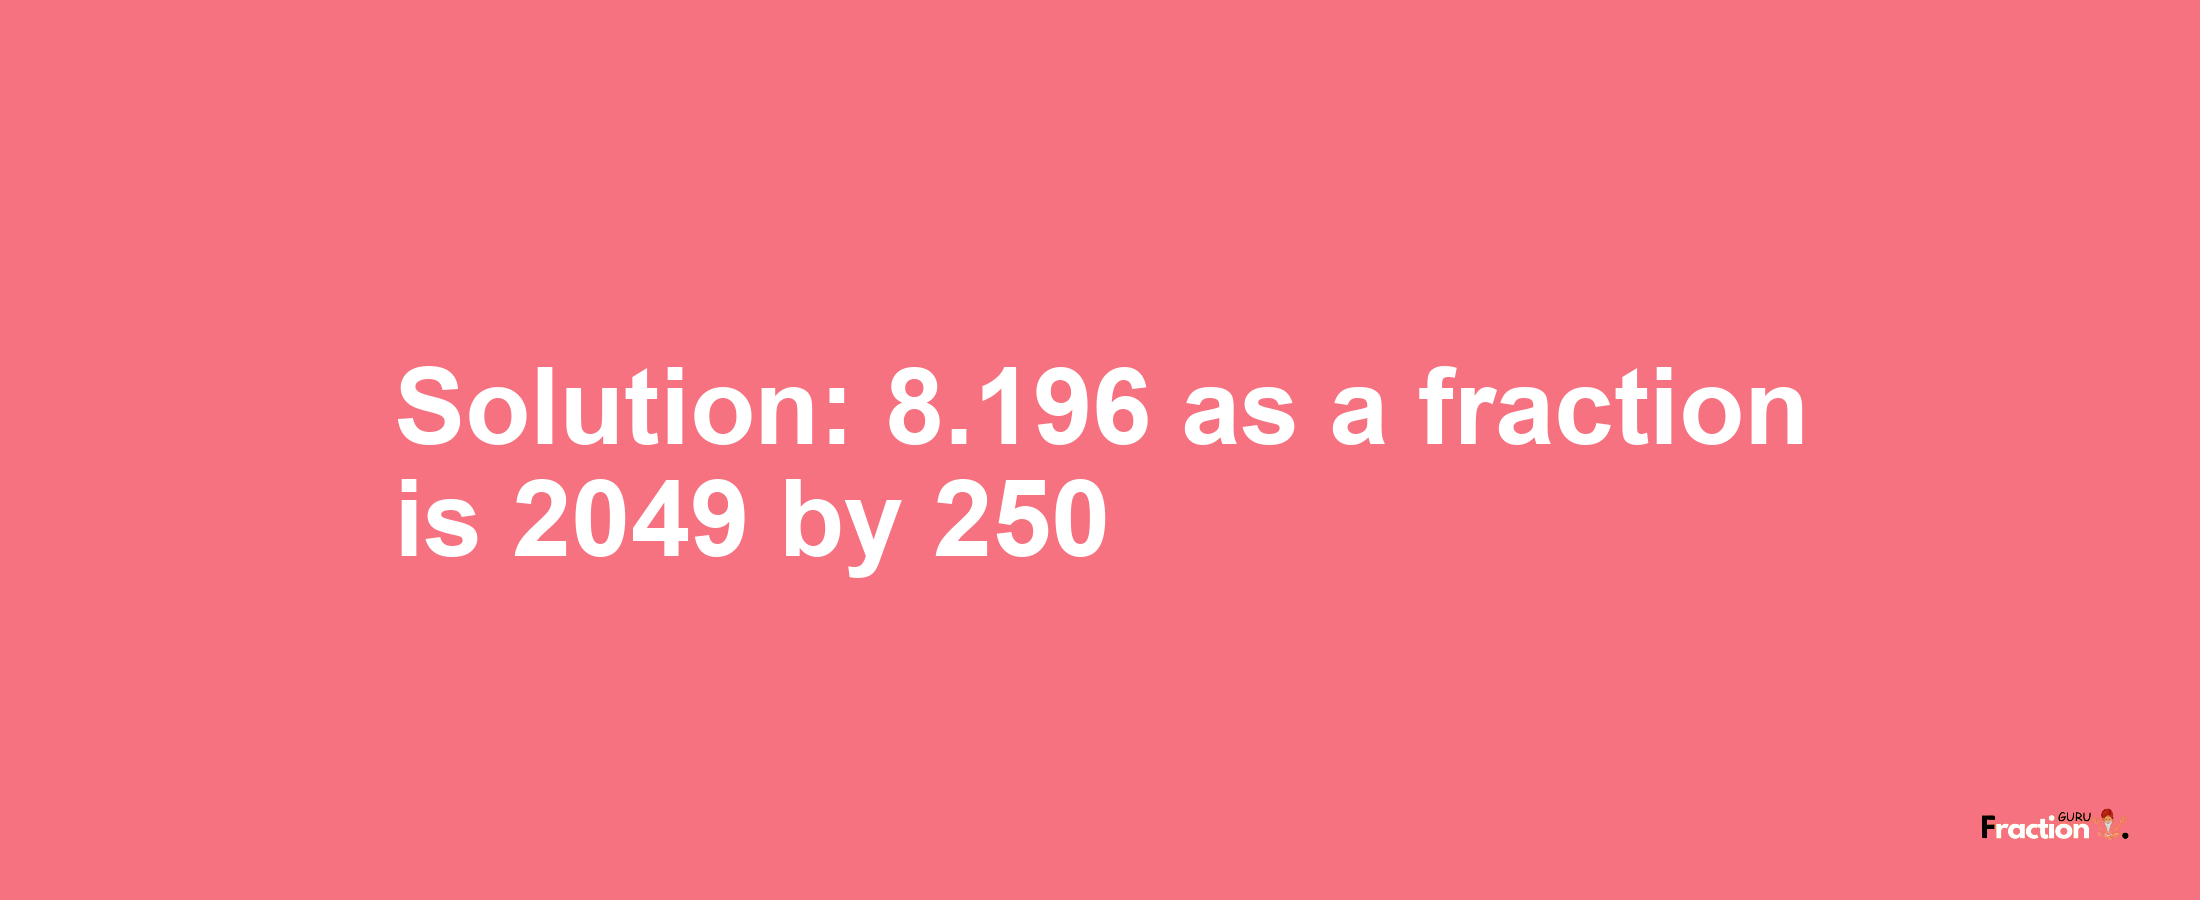 Solution:8.196 as a fraction is 2049/250